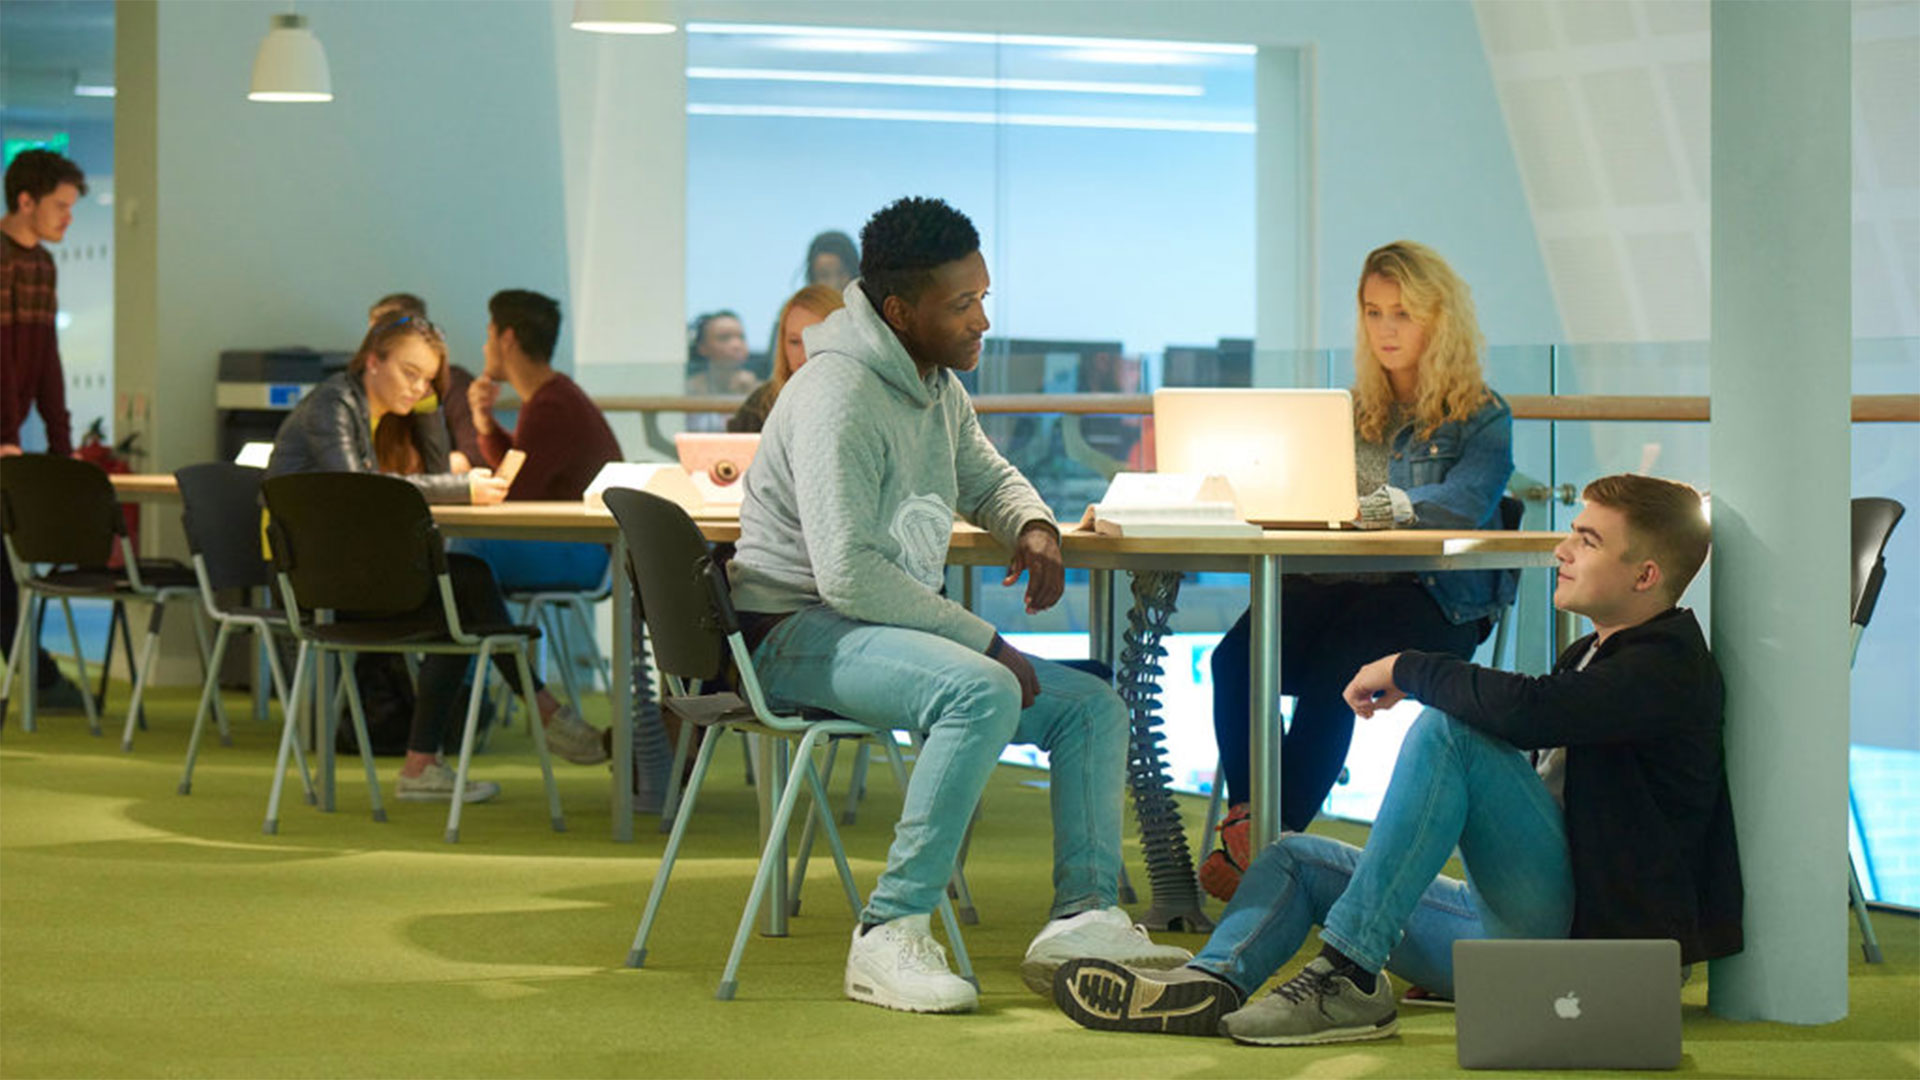 A group of students sit together. Two at a table, one using a laptop. The other person is having a conversation with another student who is sitting on the floor.